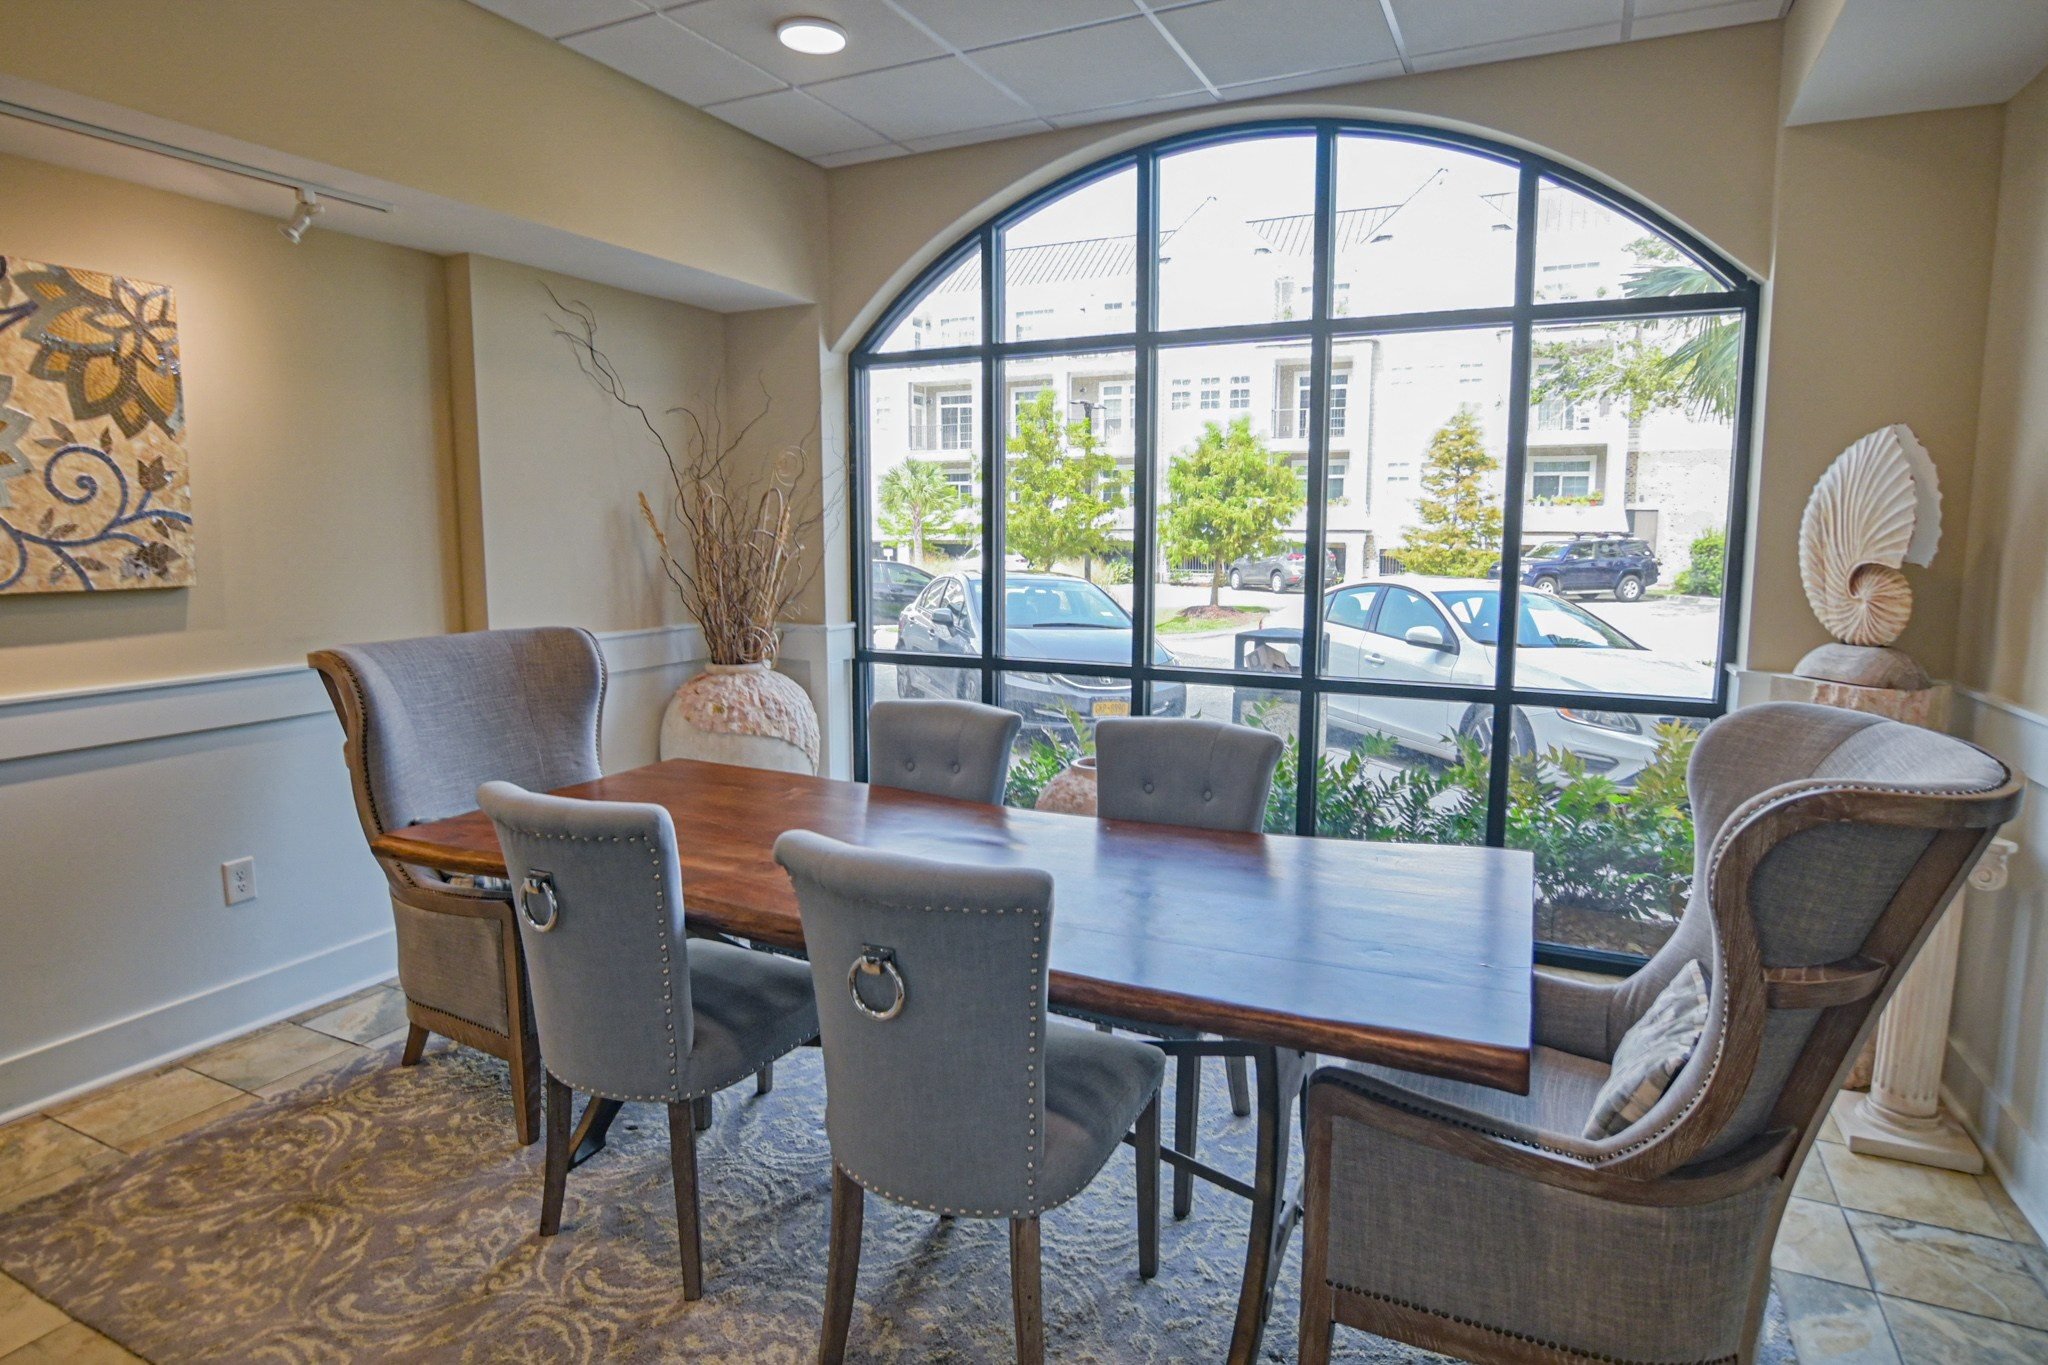 Business Center at Grand View Luxury Apartments in Wilmington, NC